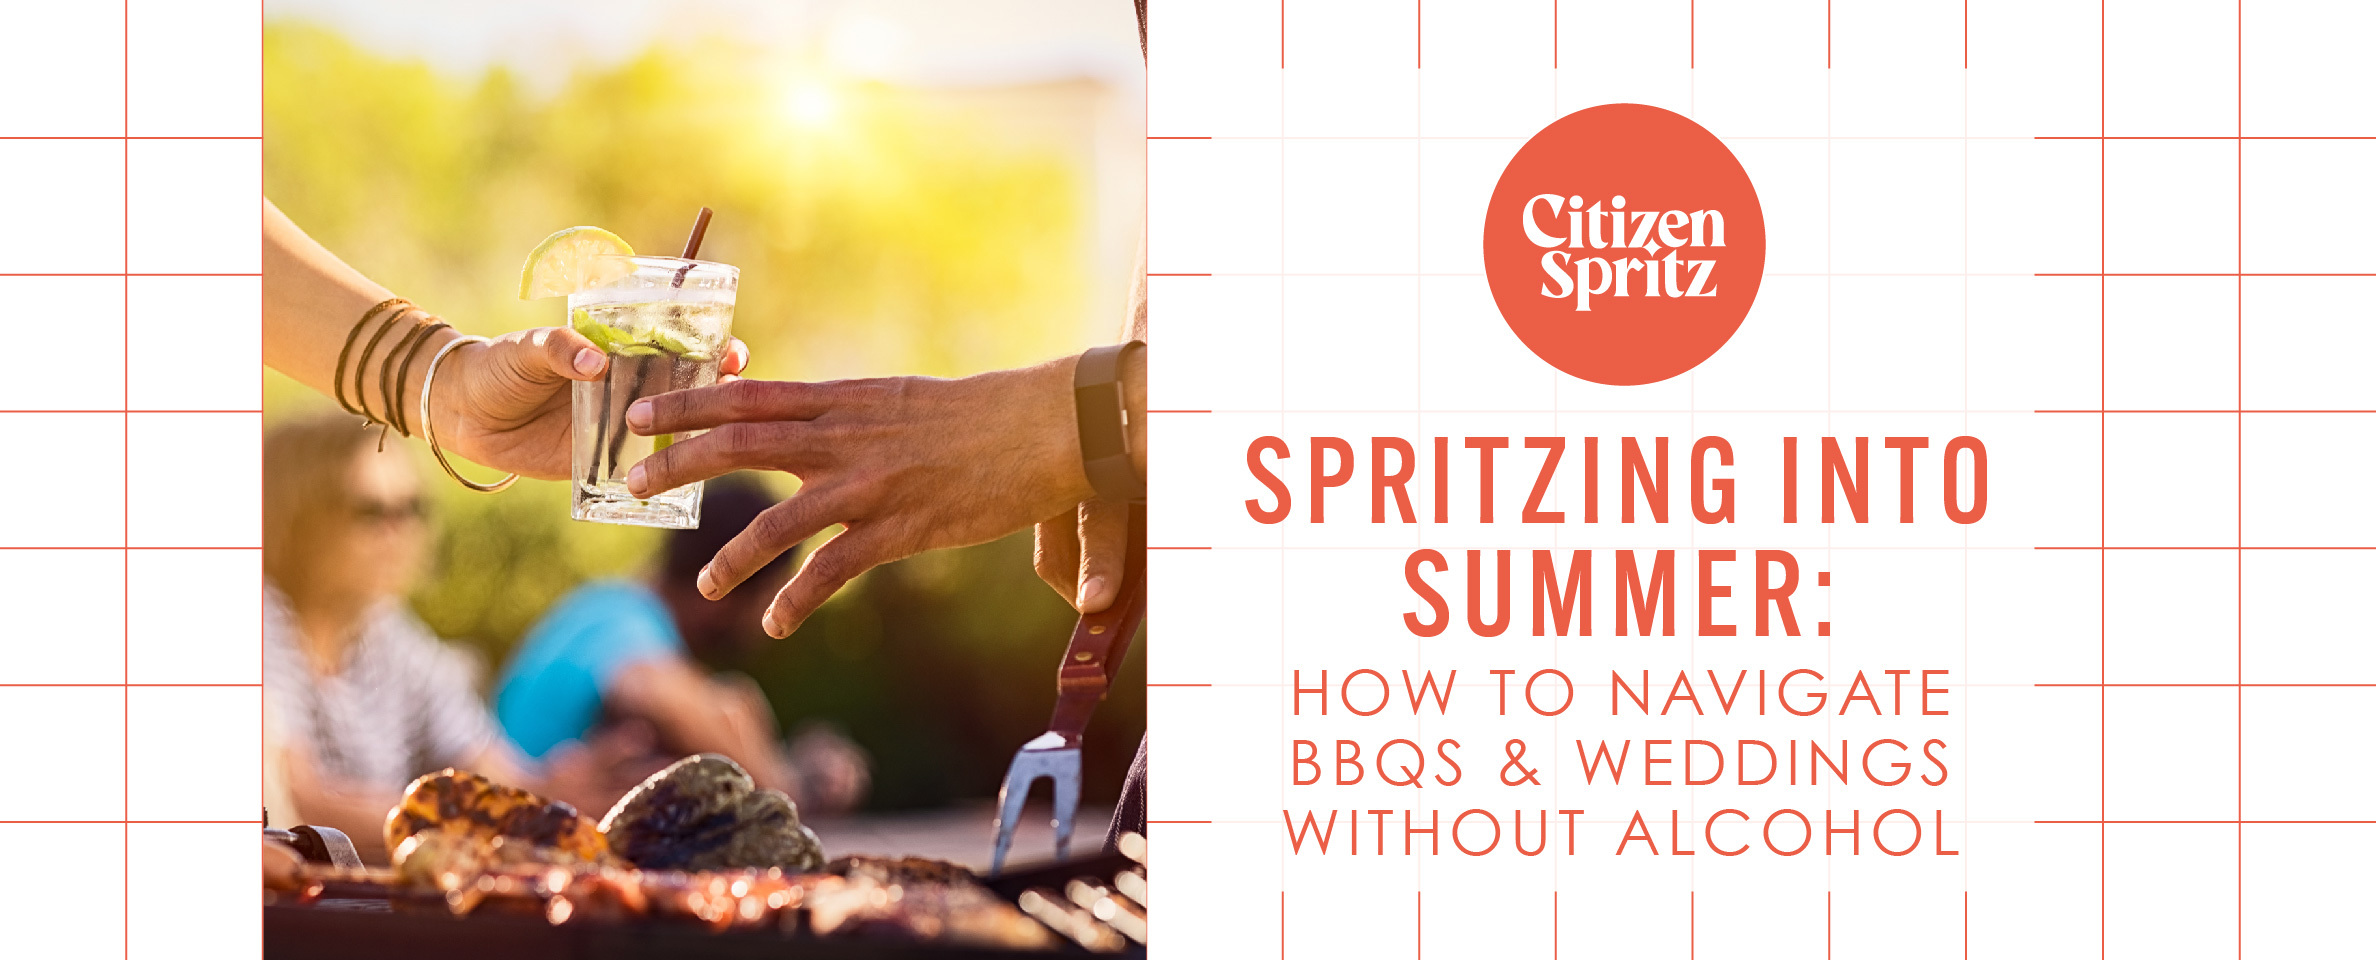 Spritzing into Summer with non-alcoholic spritzes! Learn how to navigate social events without alcohol and enjoy BBQs and weddings sober(ish).